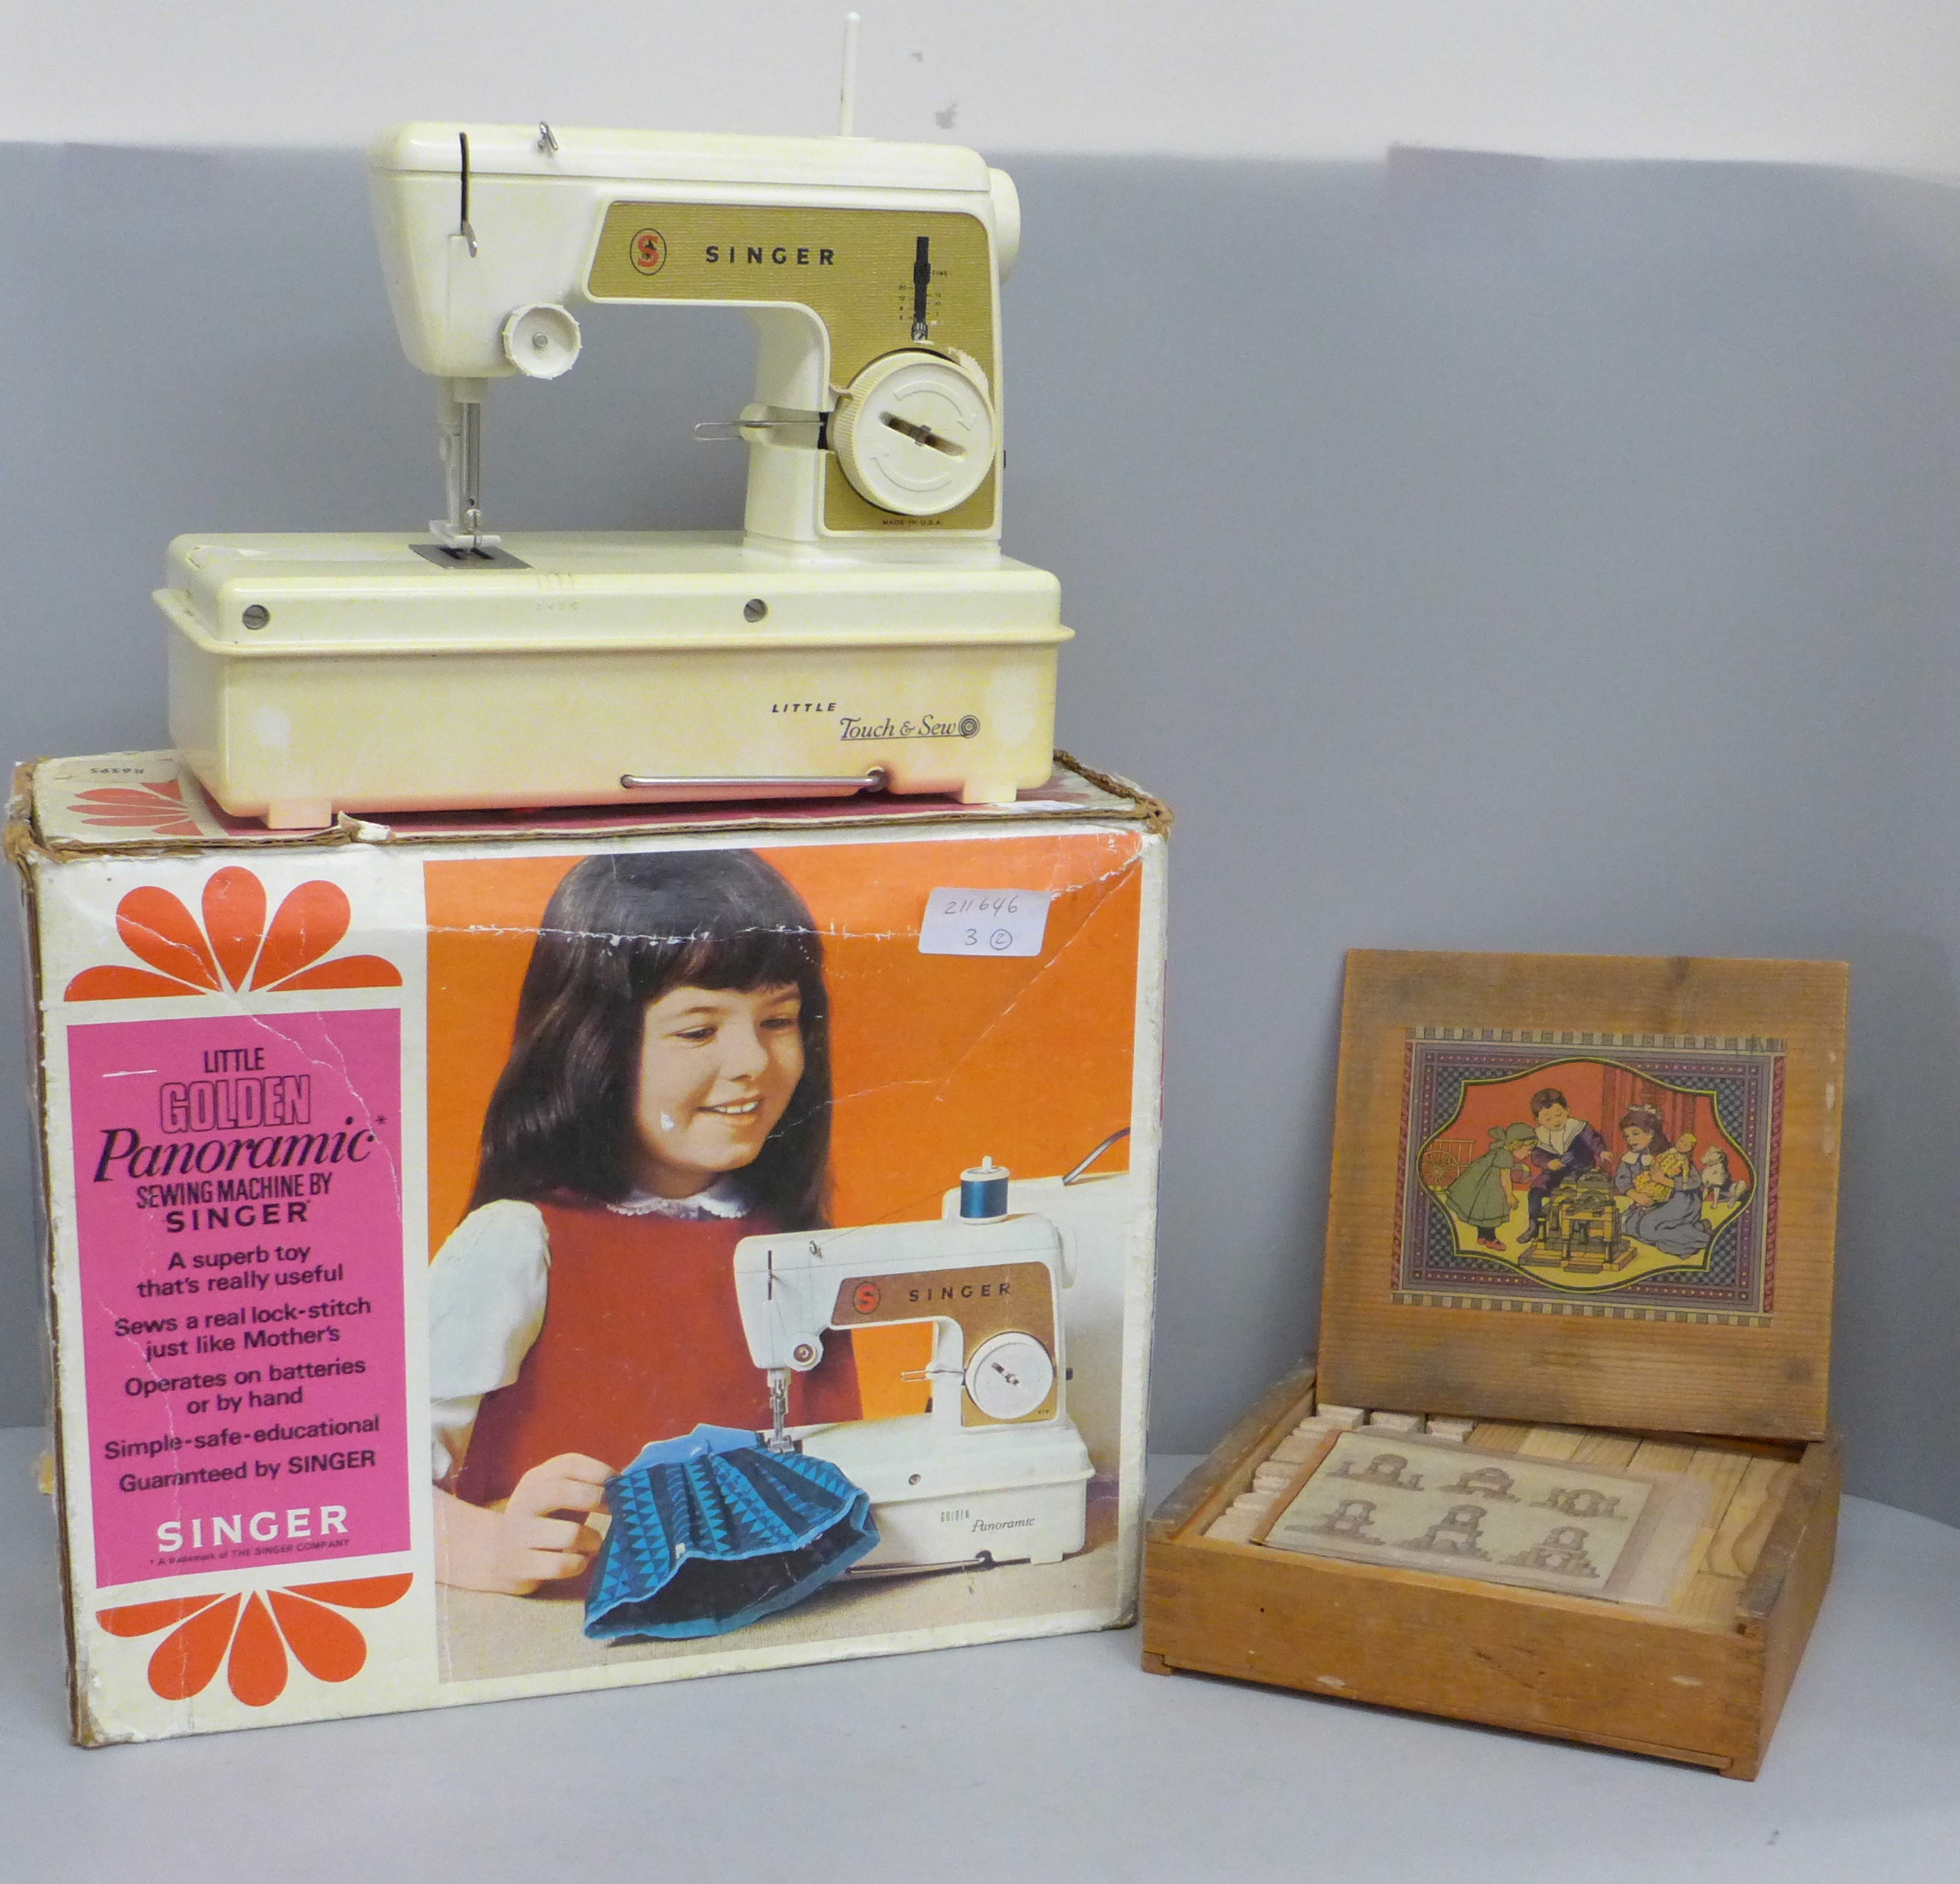 A Little Golden Panoramic sewing machine by Singer and a block building set